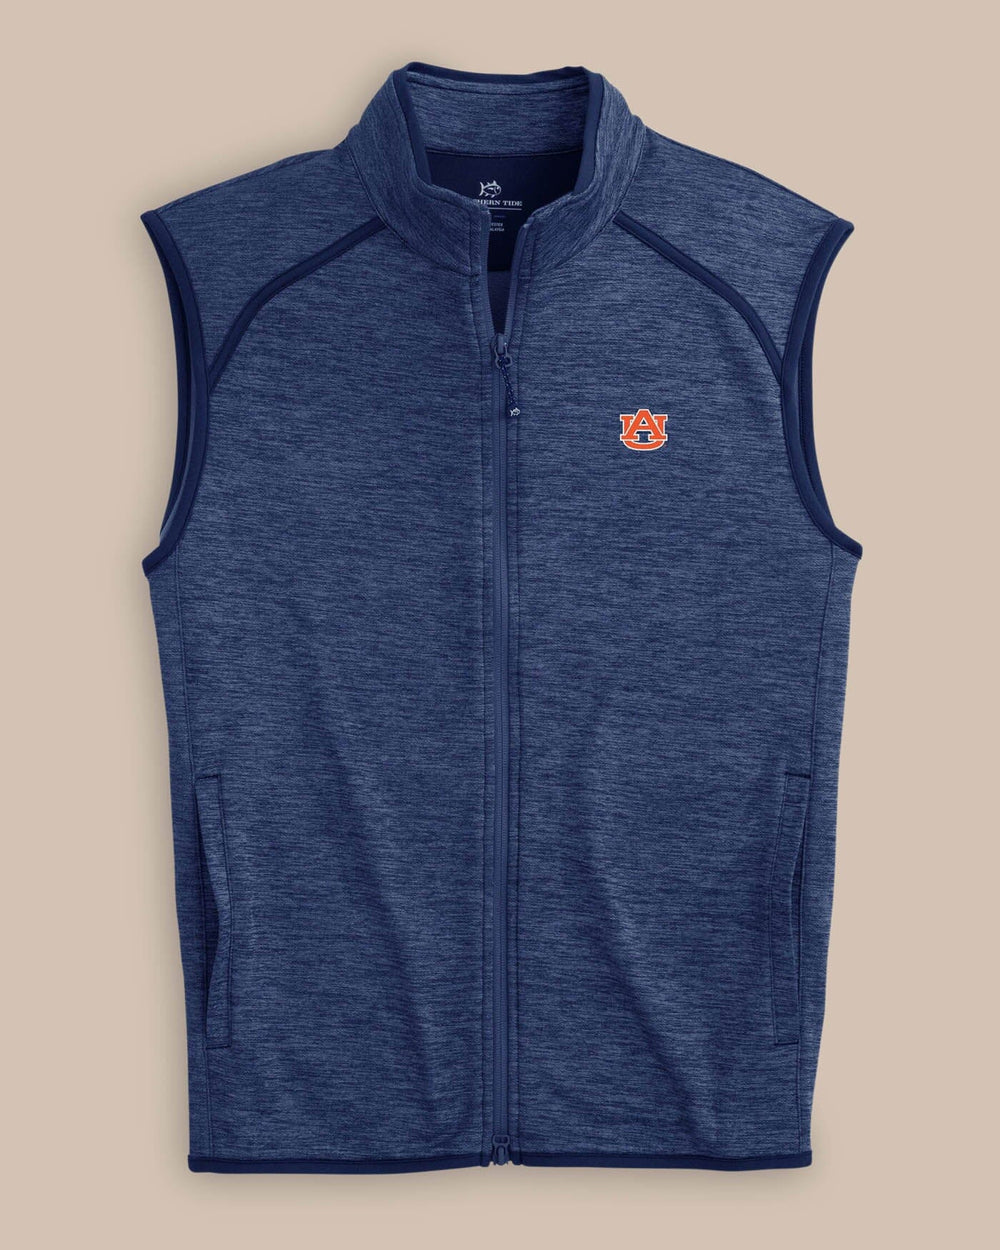 The front view of the Auburn Tigers Baybrook Heather Vest by Southern Tide - Heather Navy